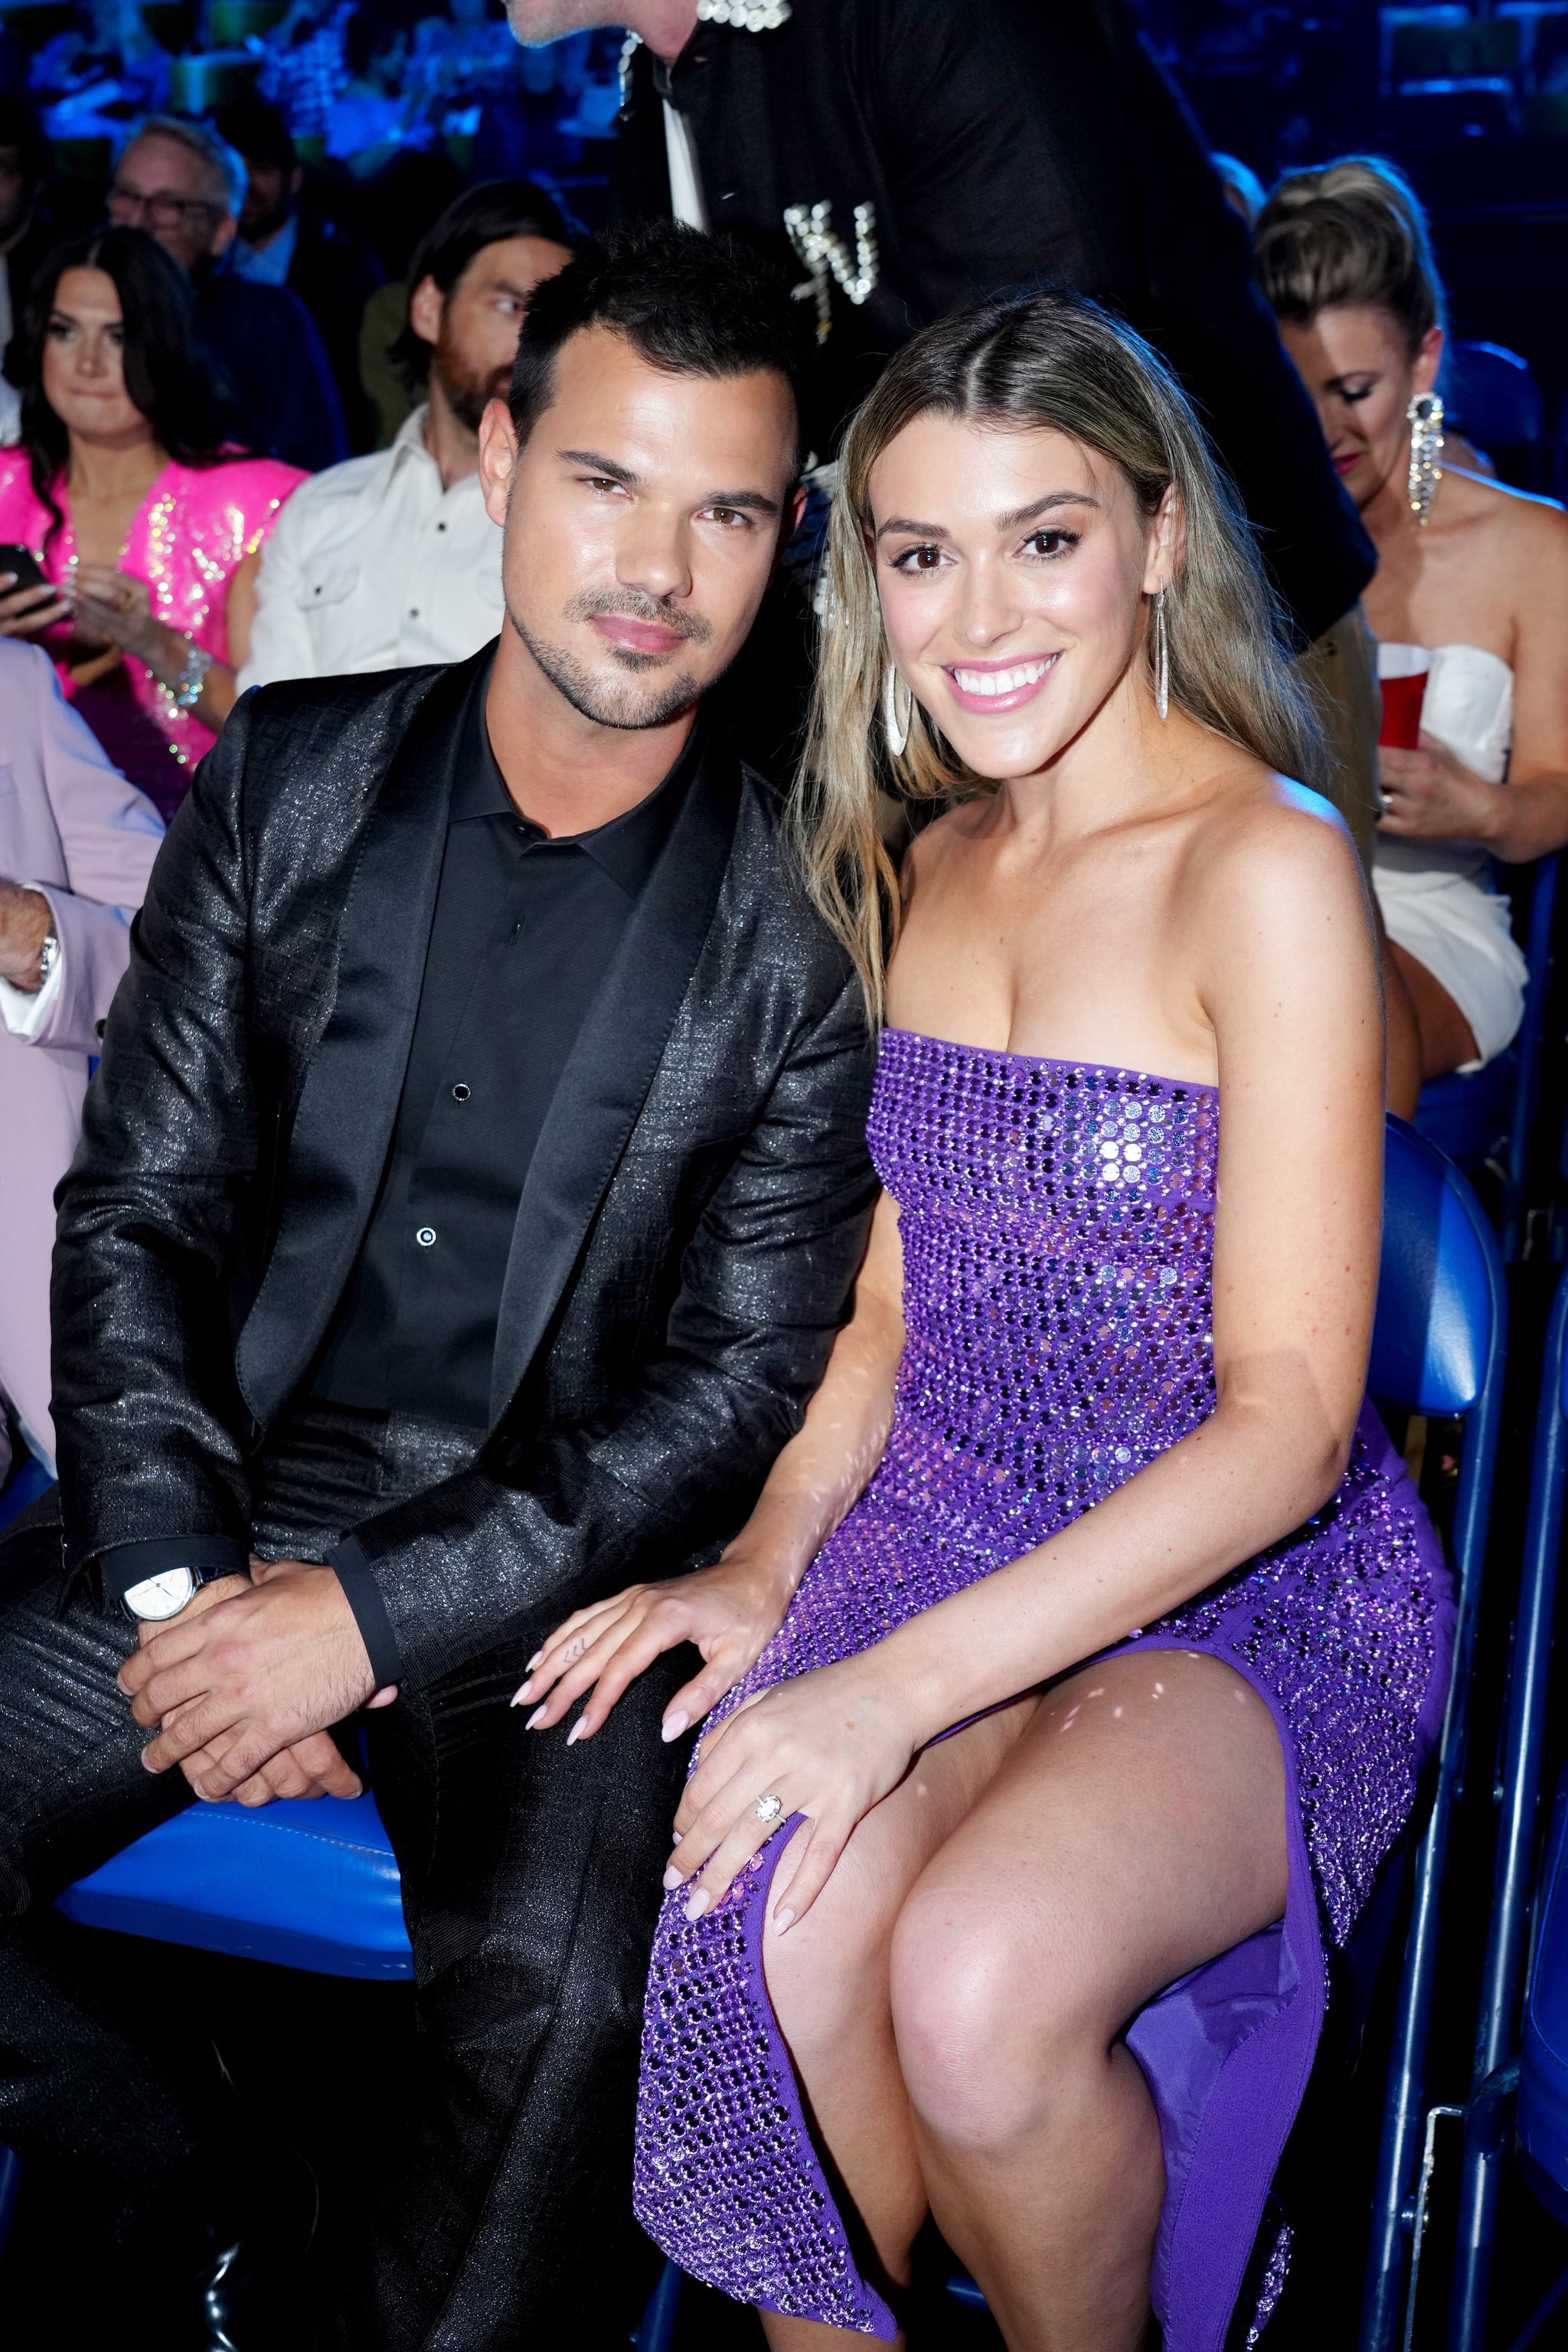 NASHVILLE, TENNESSEE - APRIL 11: (L-R) Taylor Lautner and Taylor Dome attend the 2022 CMT Music Awards at Nashville Municipal Auditorium on April 11, 2022 in Nashville, Tennessee. (Photo by Jeff Kravitz/Getty Images for CMT)